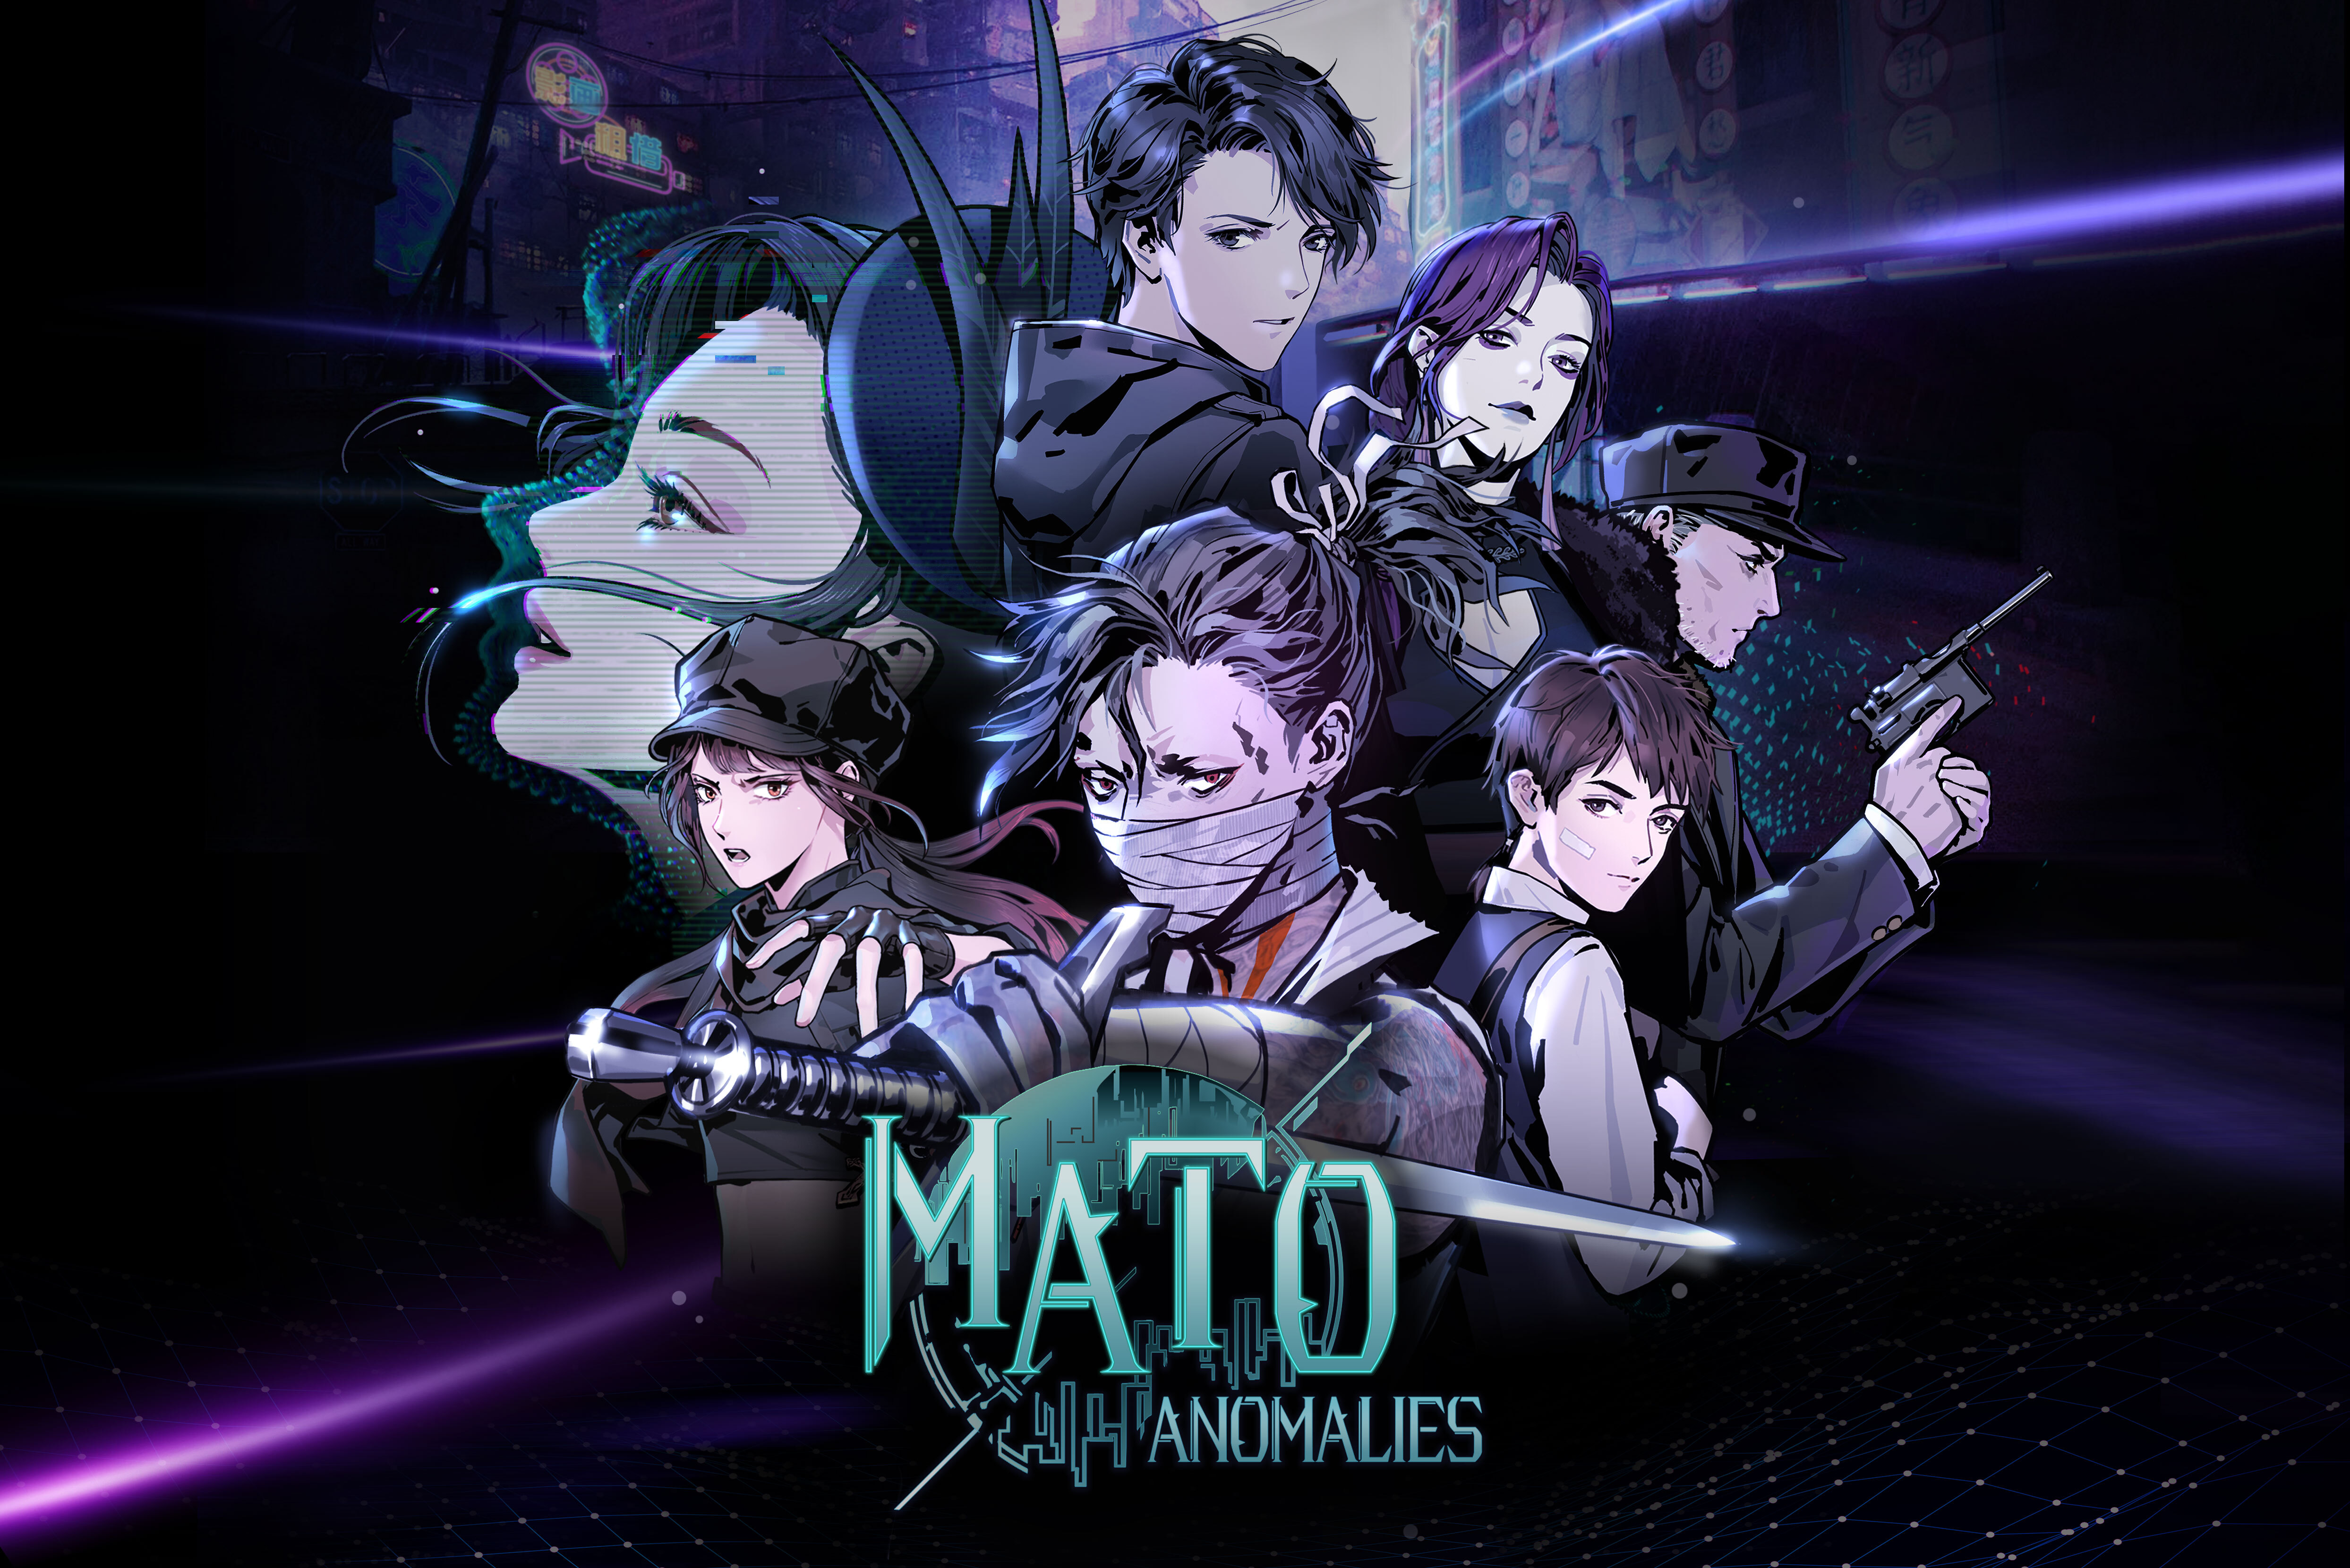 the futuristic anime-inspired rpg mato anomalies is coming to pc and consoles on march 10th 2023